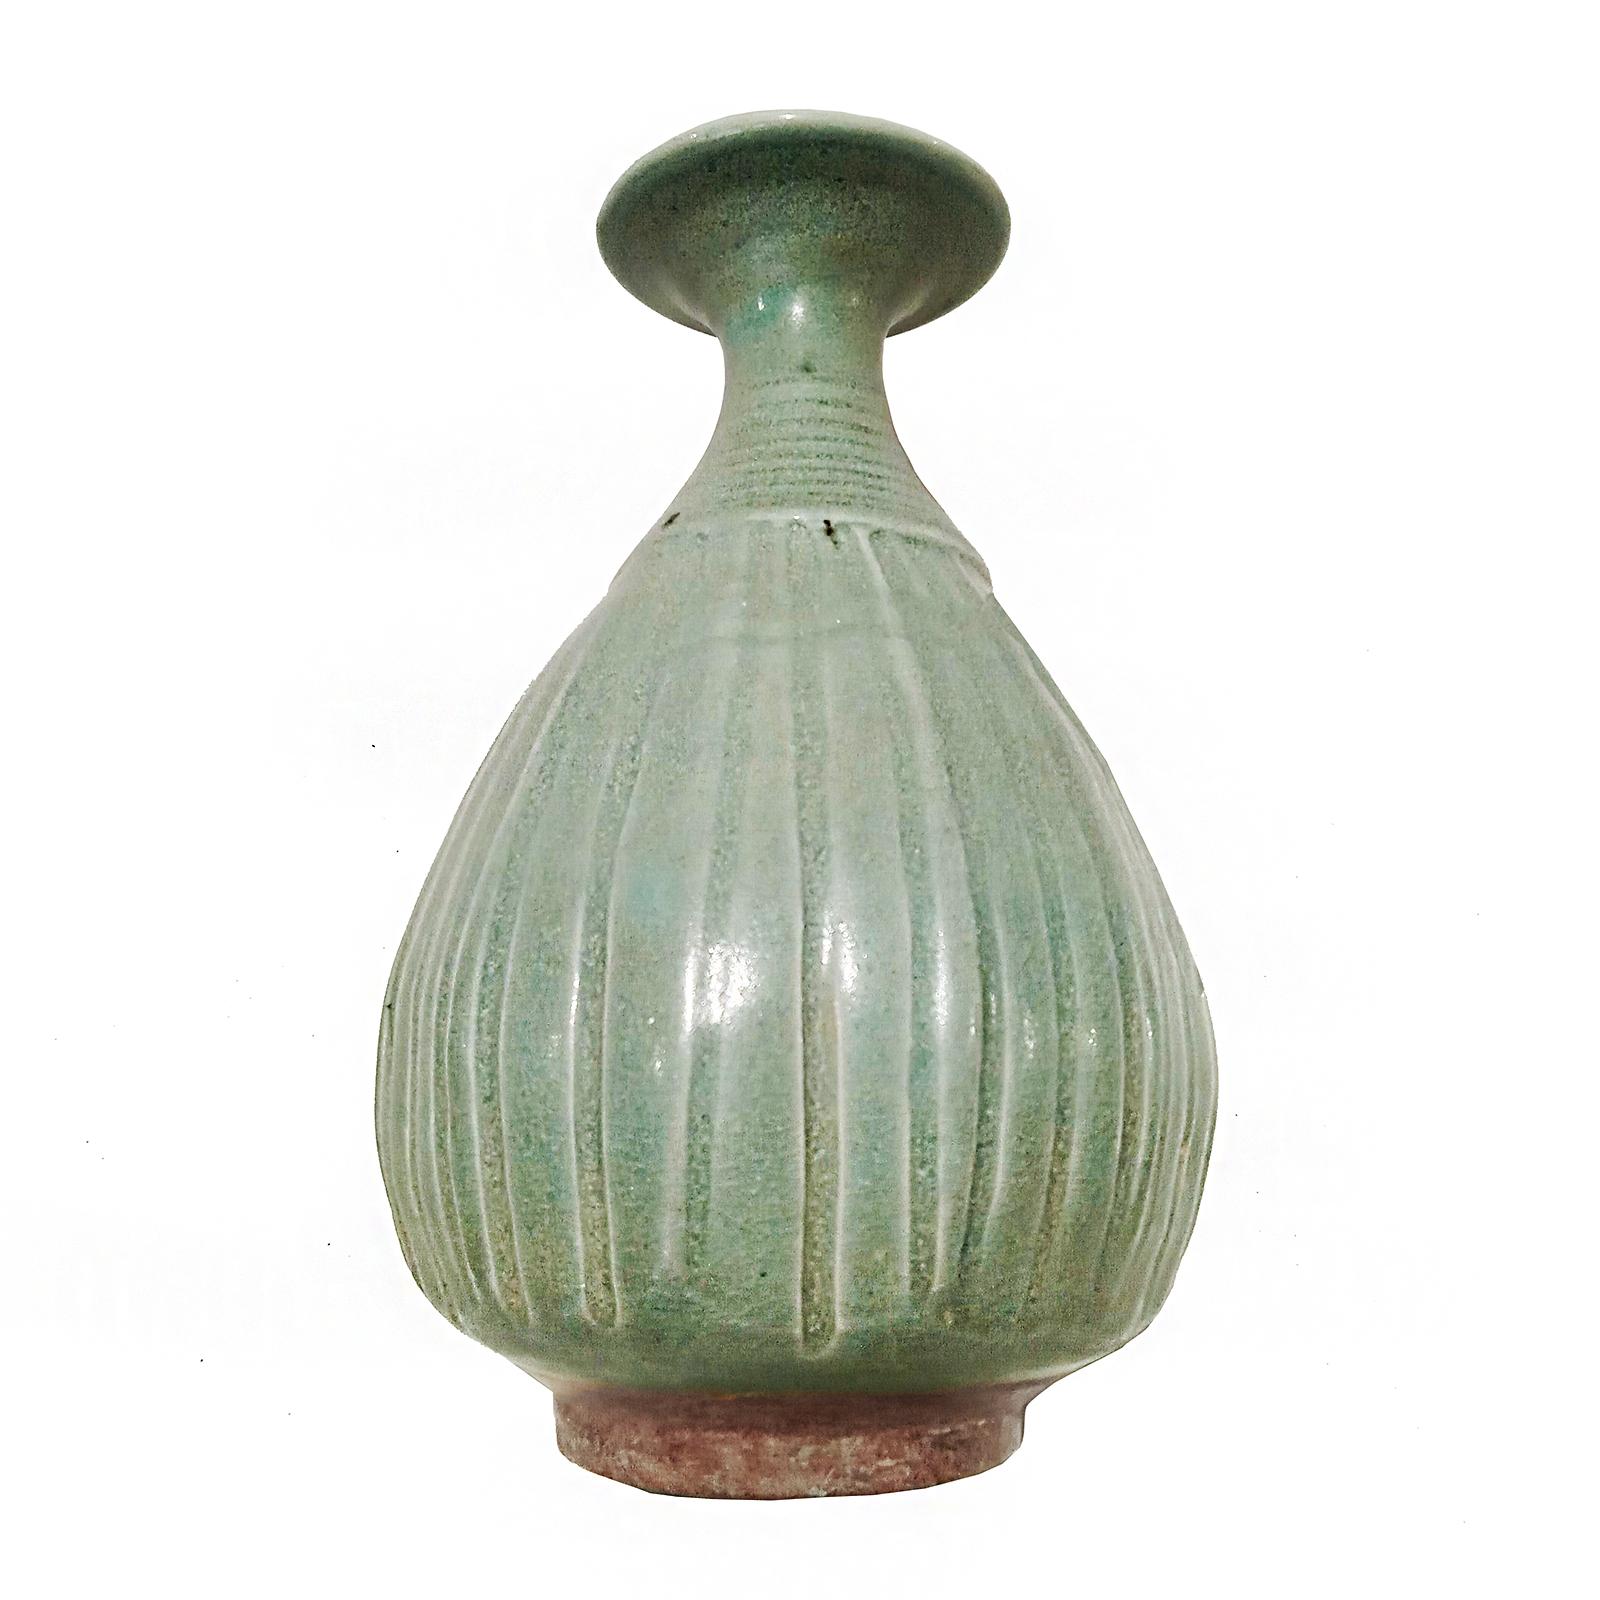 A beautiful Celadon vase from Thailand, late 19th Century. 

While the golden age of Thai ceramics ended around the 15-16th Centuries, Thai artisans transmitted the craft through generations, later producing smaller numbers of pieces with different